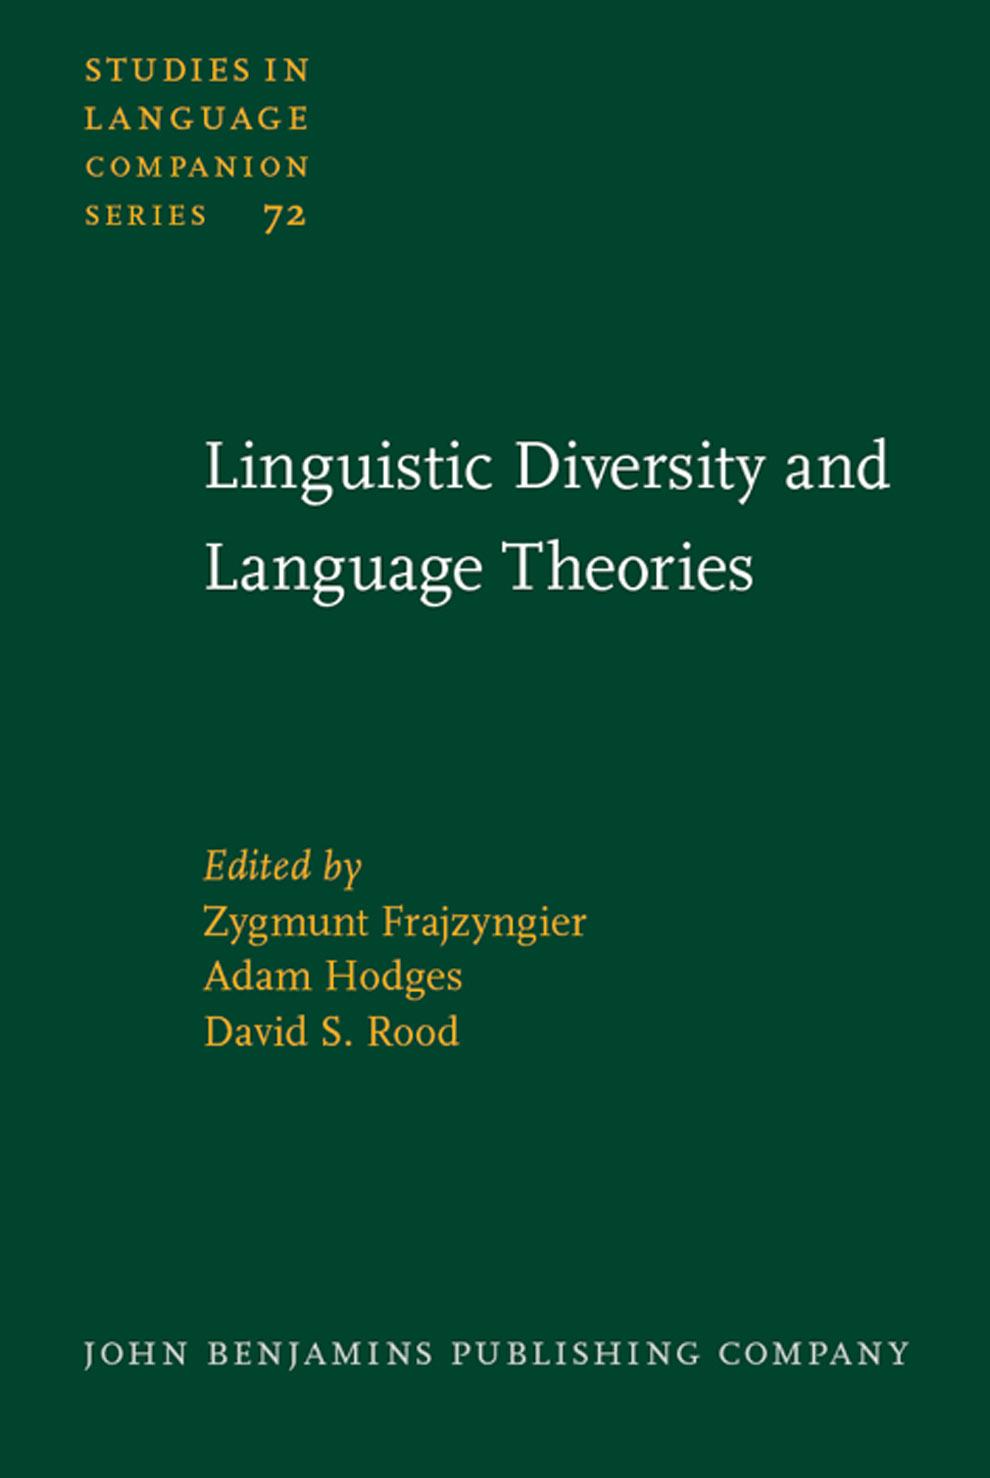 Linguistic Diversity and Language Theories